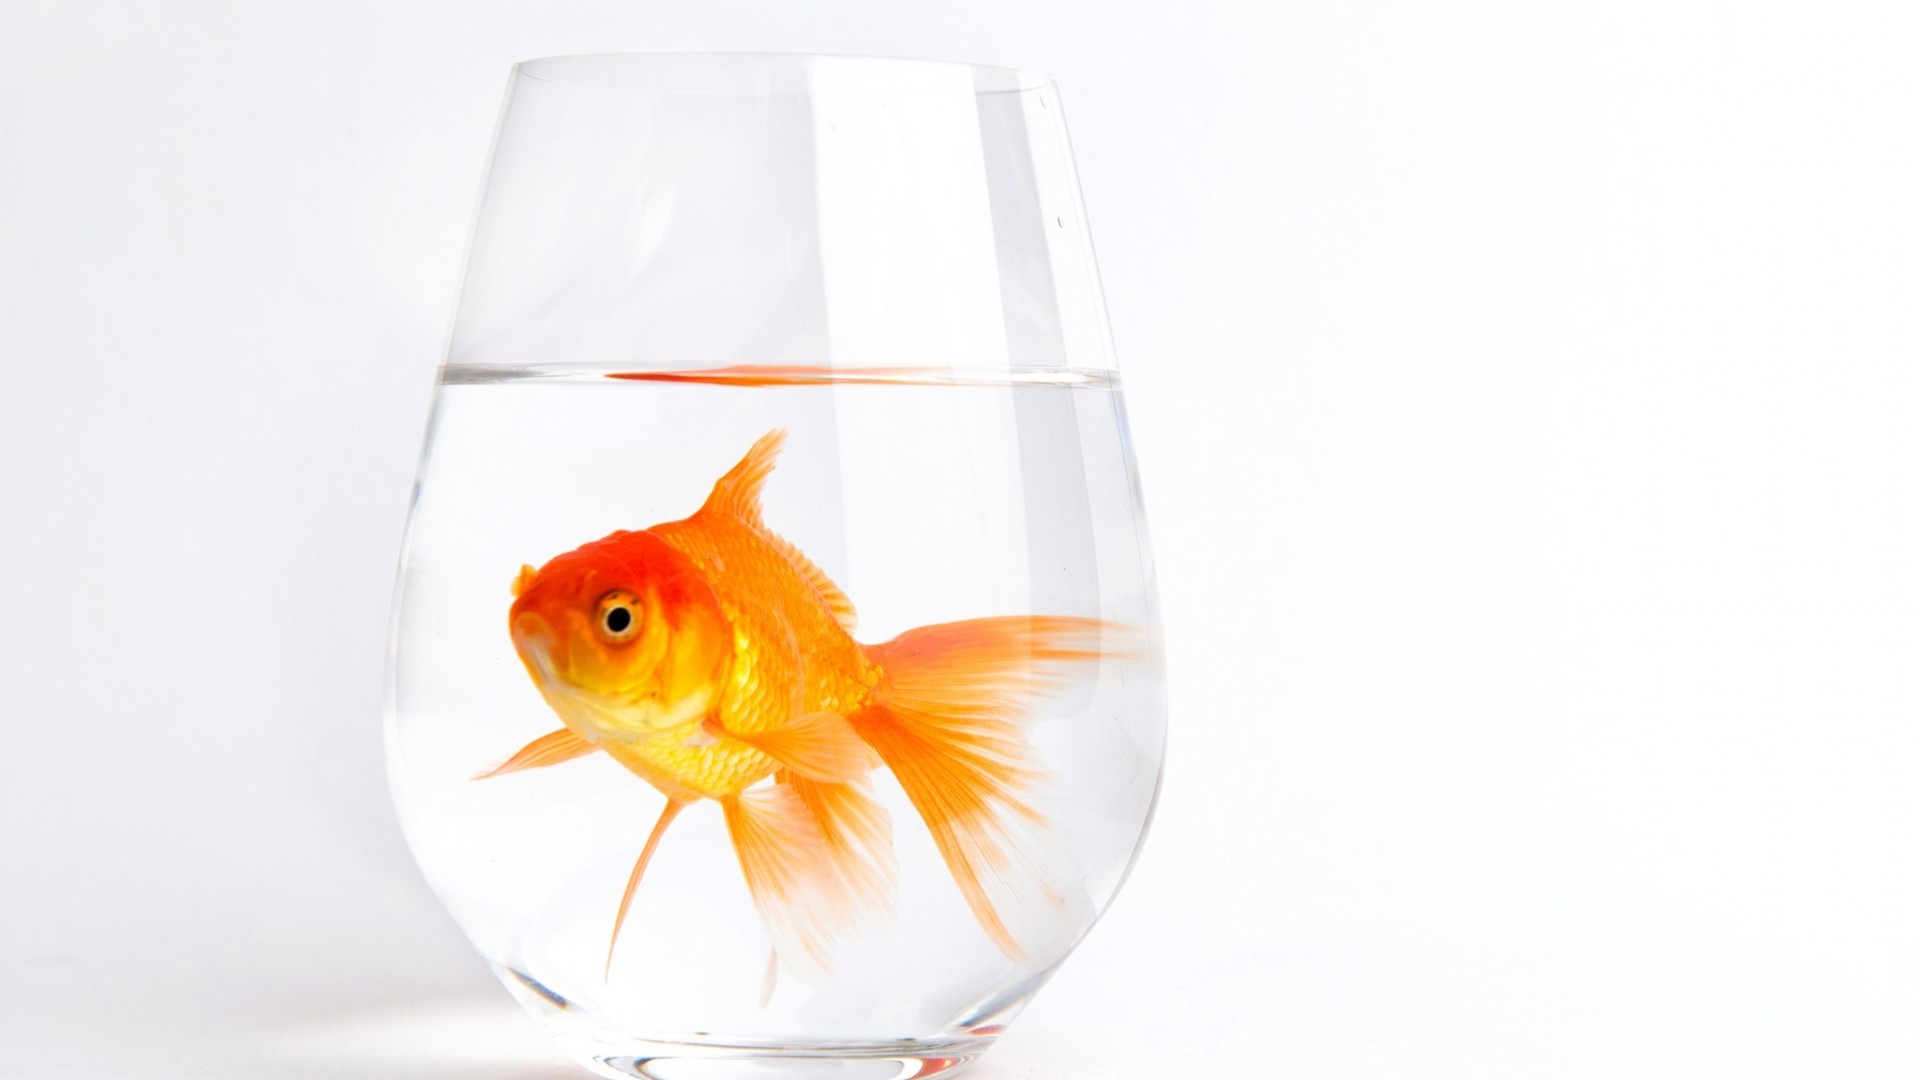 Lonely Gold Fish for 1920 x 1080 HDTV 1080p resolution